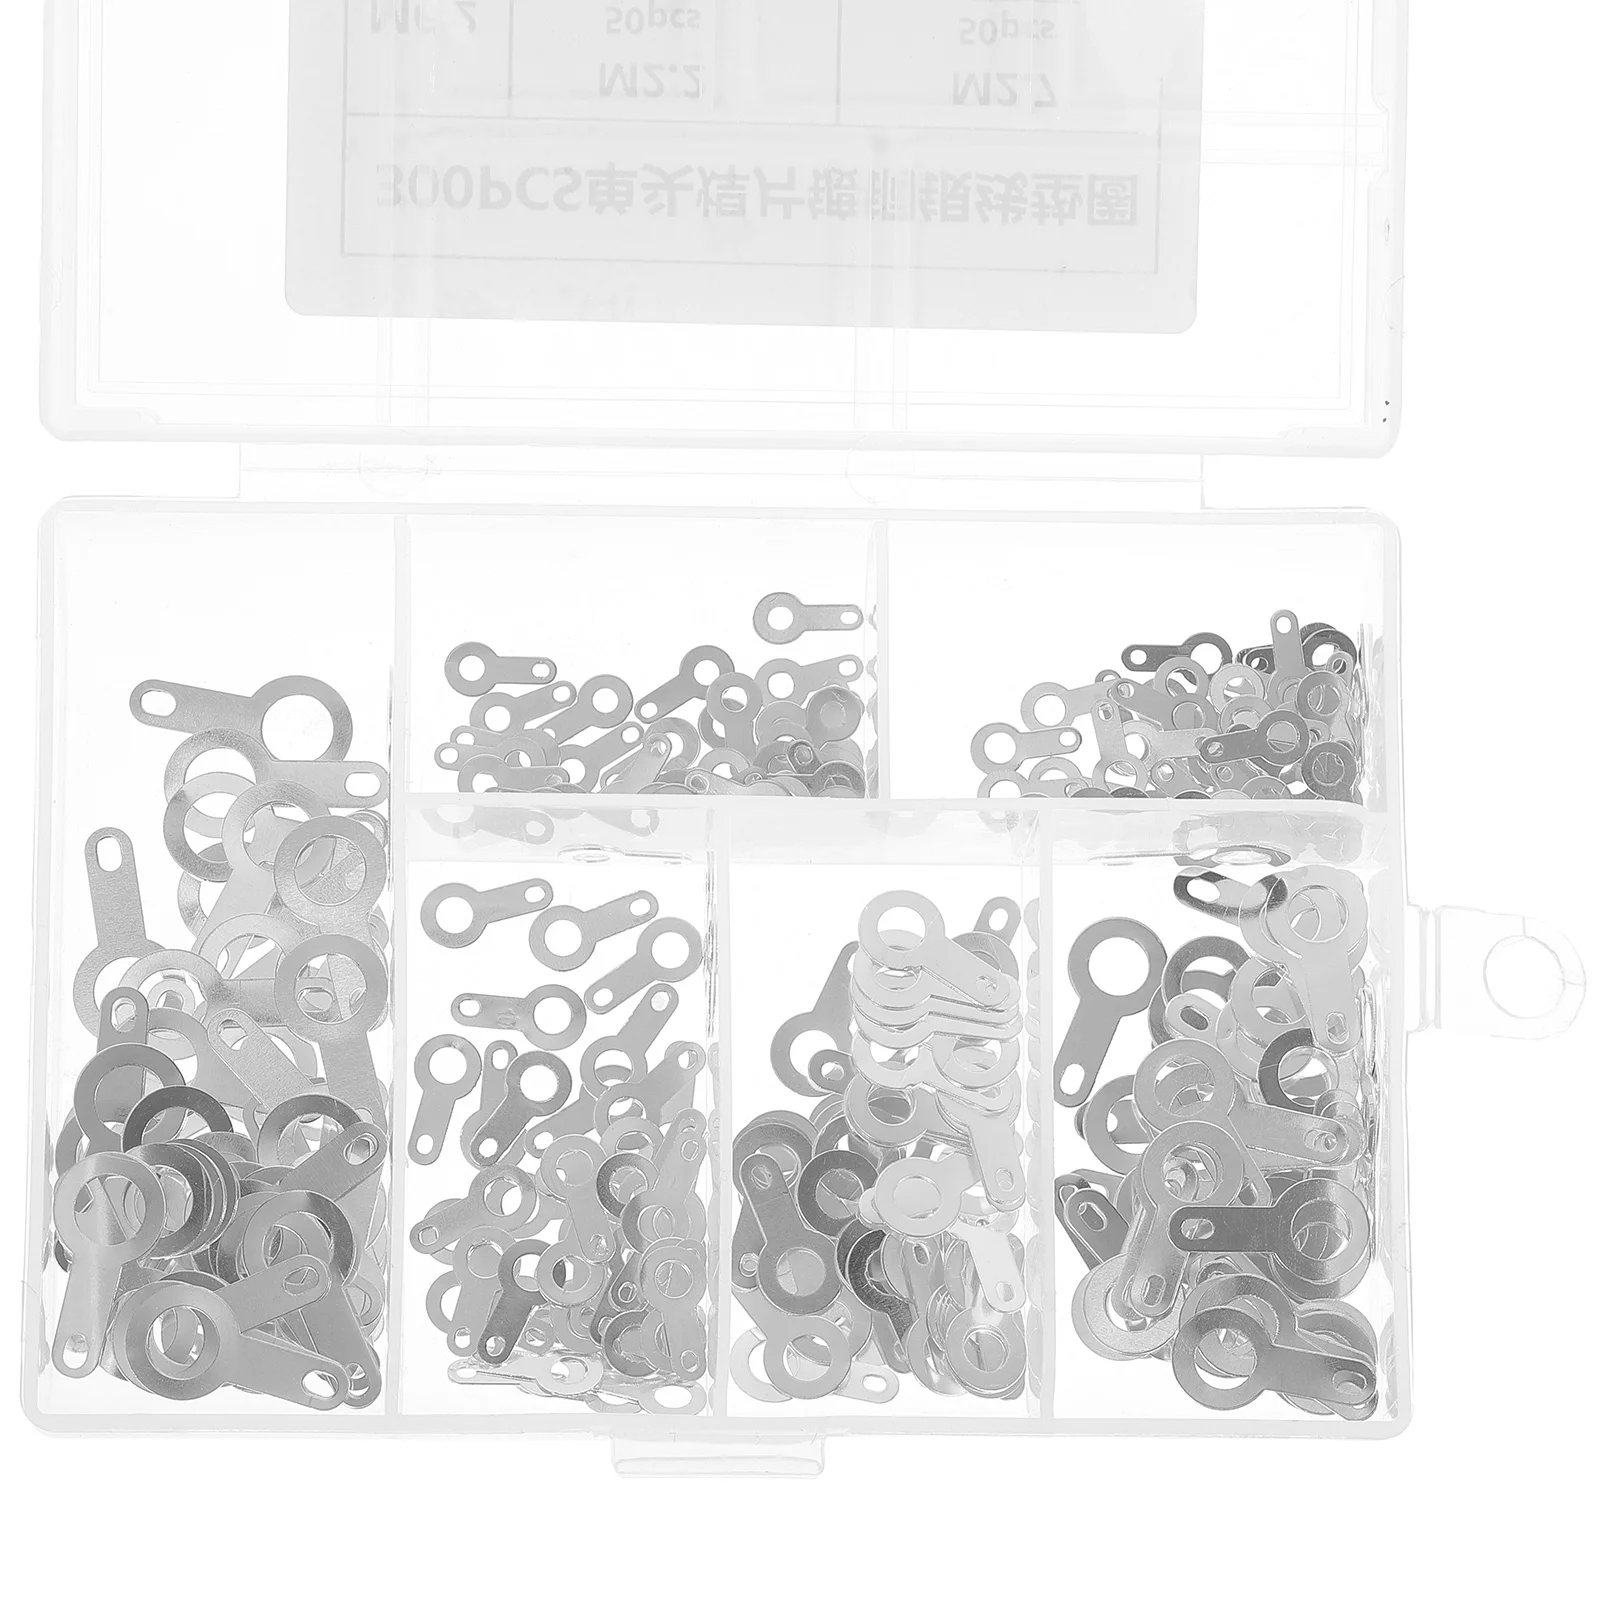 

300pcs Single-head Solder Lug Wire Wire Terminal Connectors Soldering Washers Copper Plating Plain for